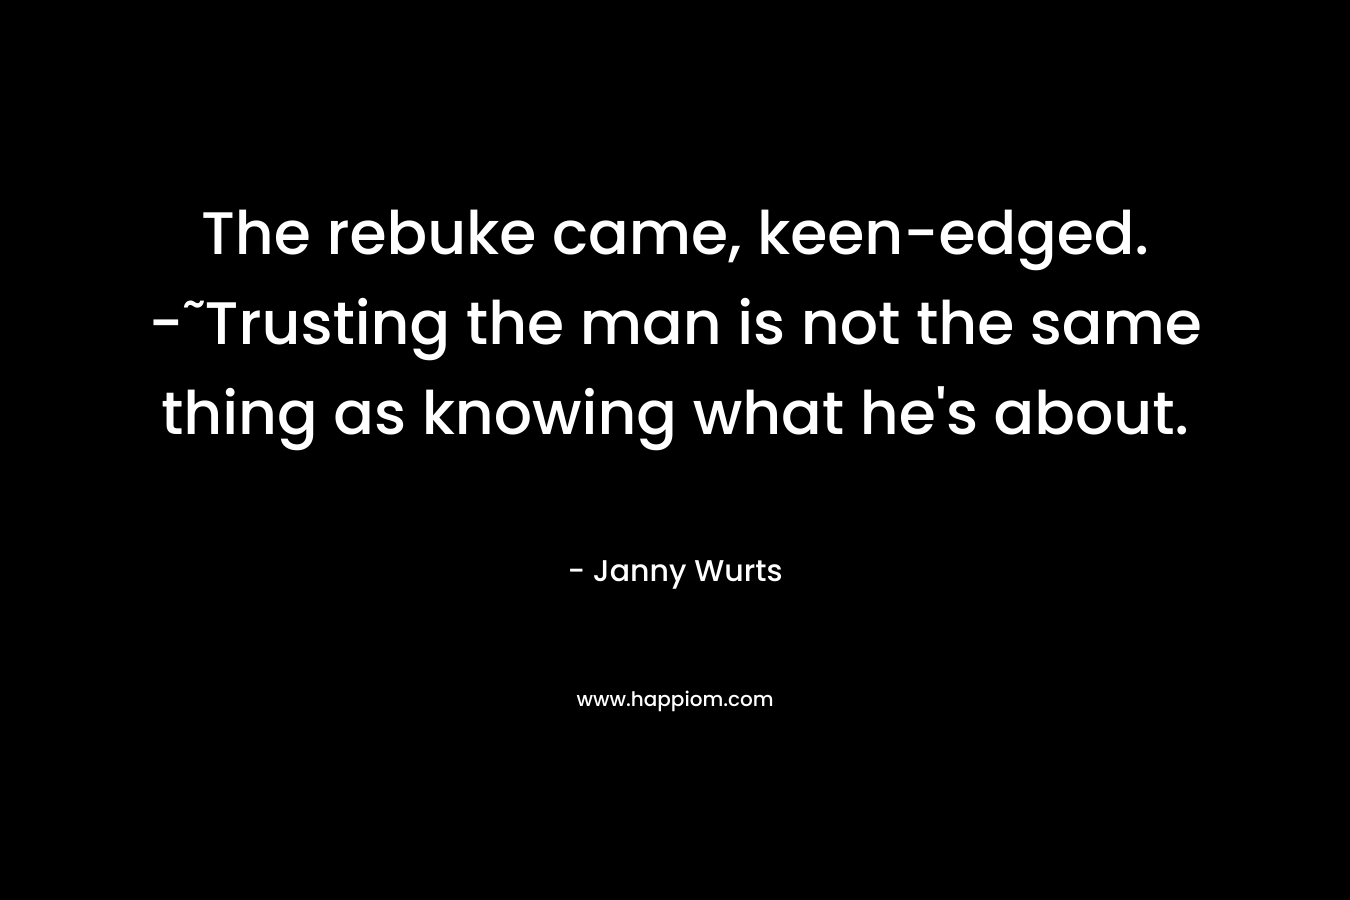 The rebuke came, keen-edged. -˜Trusting the man is not the same thing as knowing what he's about.